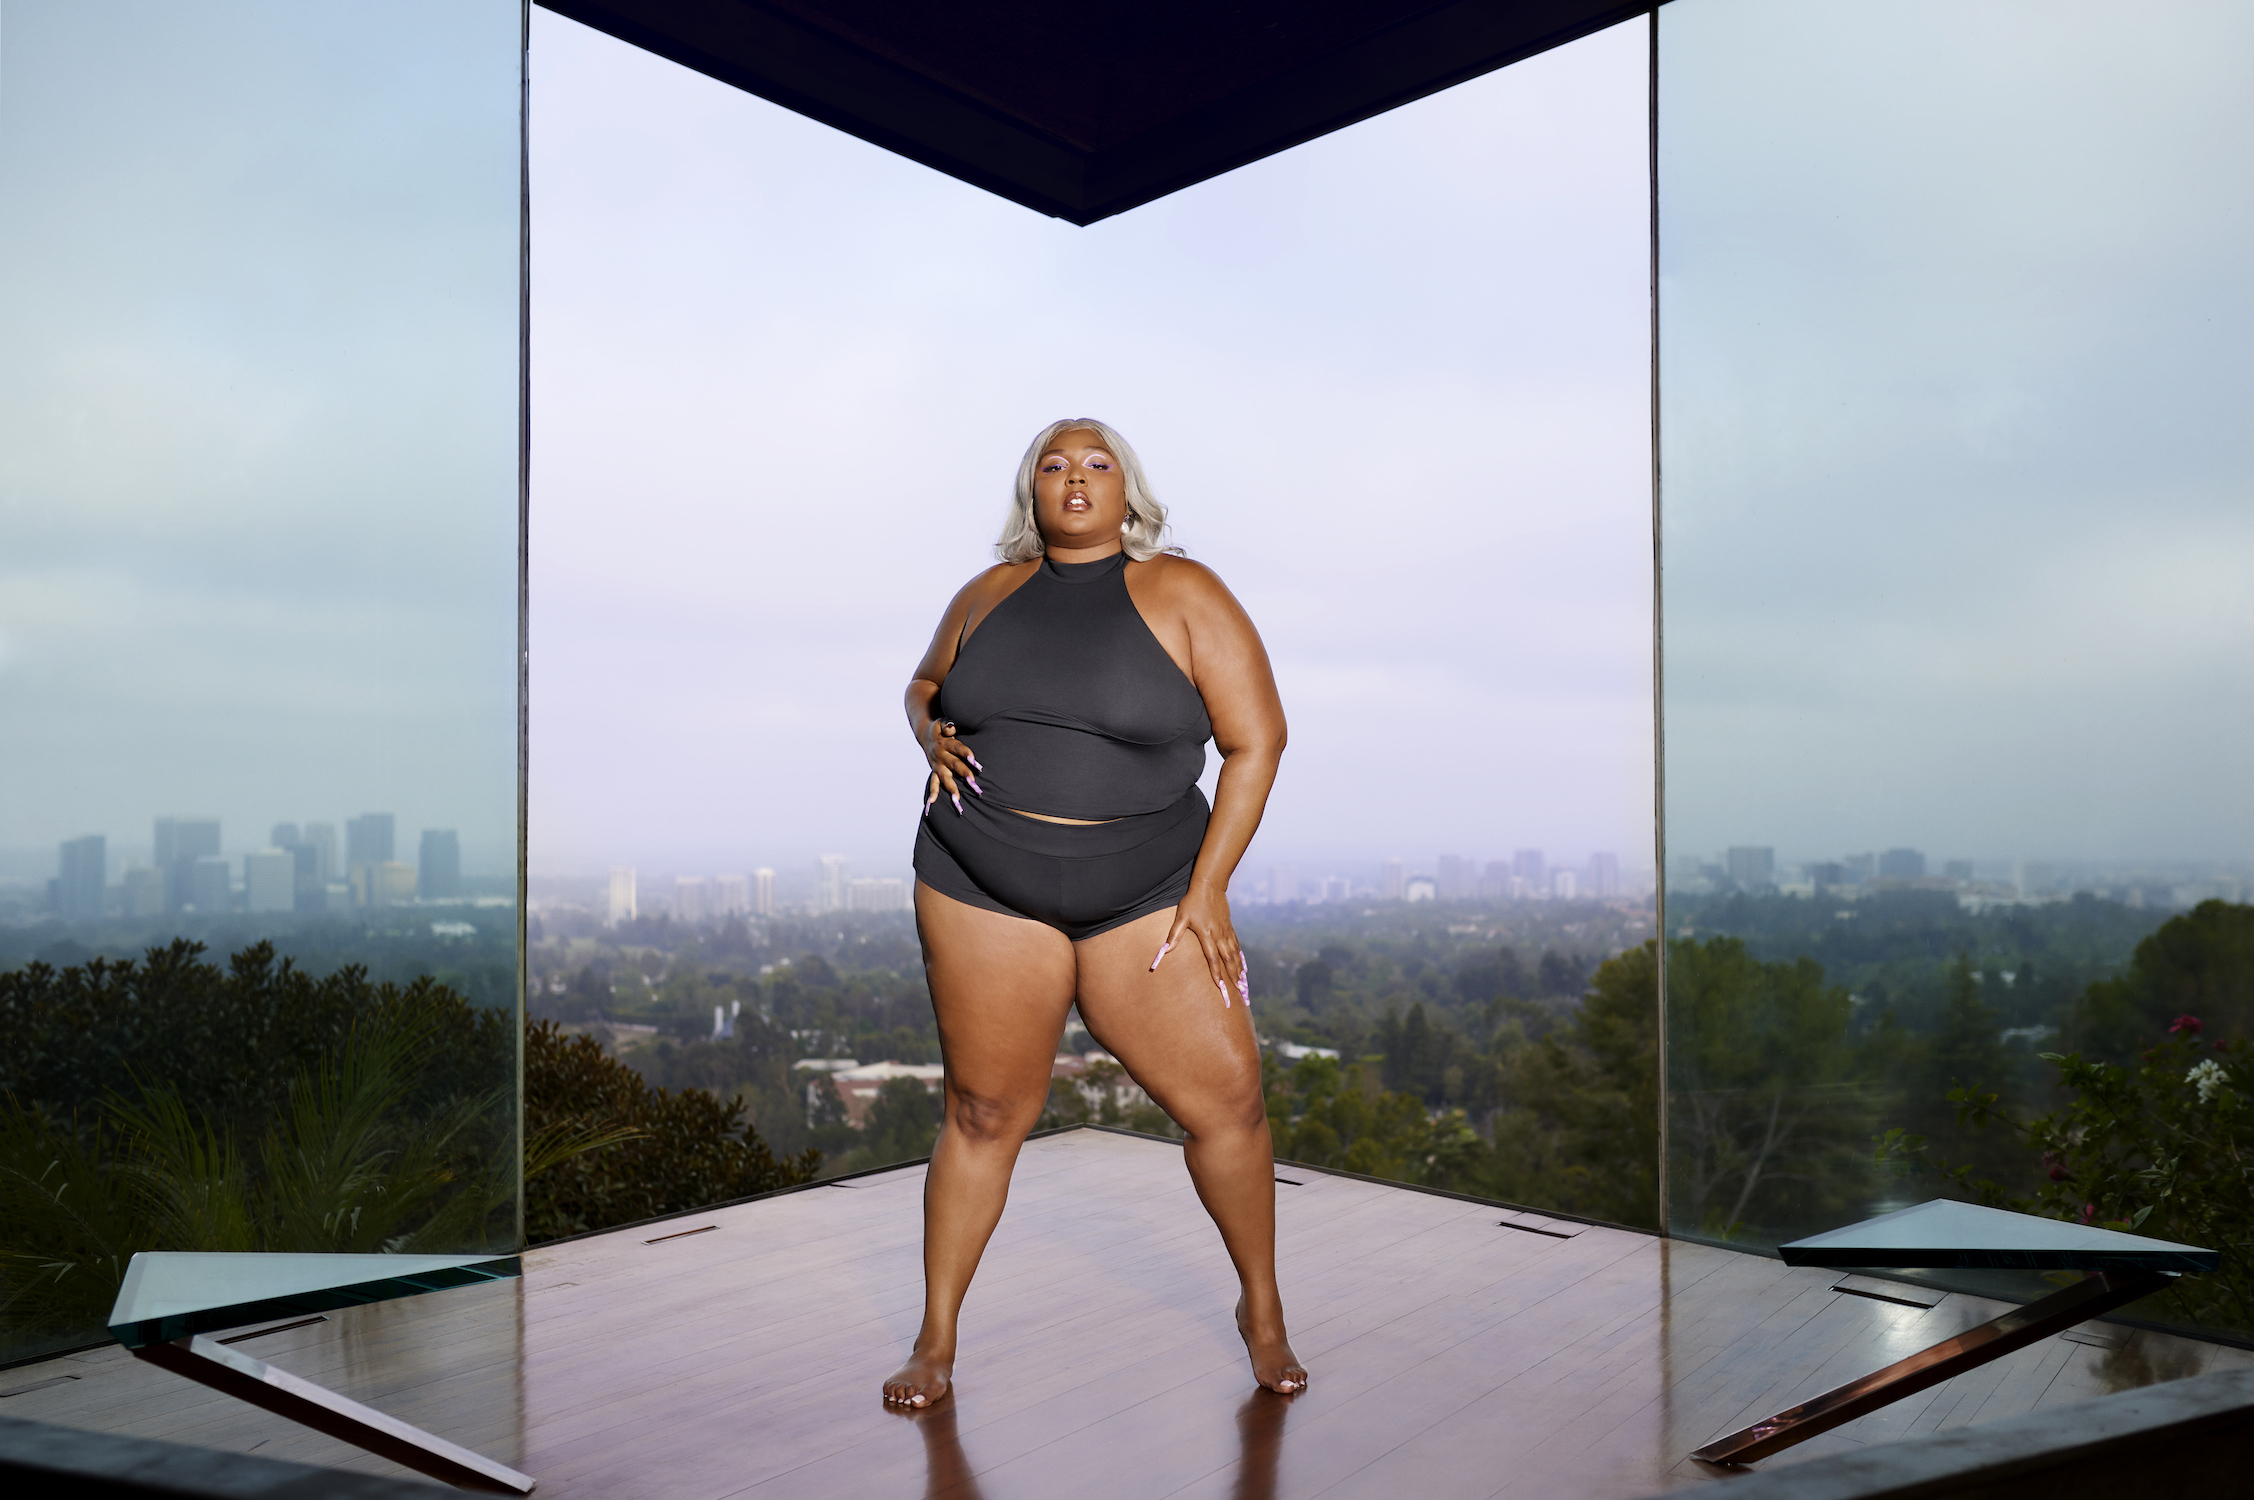 Lizzo is Feeling “Good As Hell” About Her Brand's New Loungewear